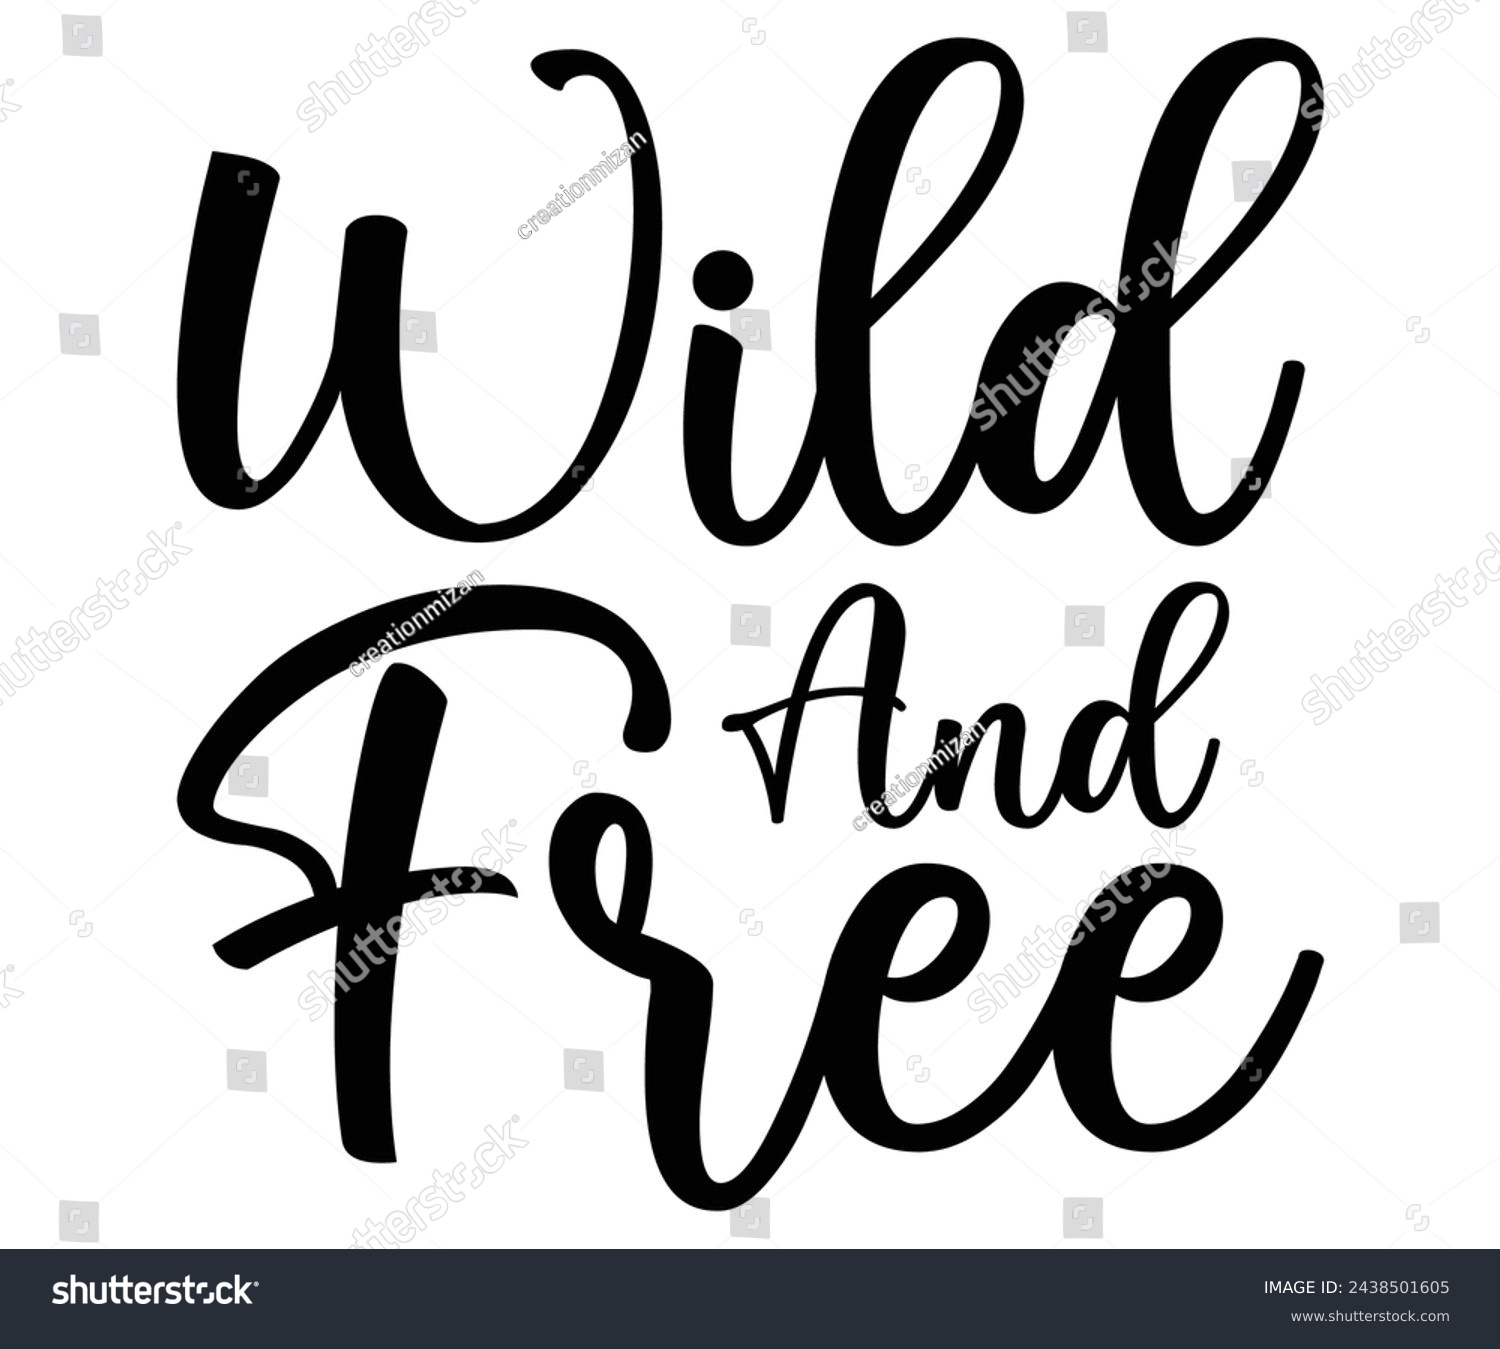 SVG of Wild And Free Svg,Camping Svg,Hiking,Funny Camping,Adventure,Summer Camp,Happy Camper,Camp Life,Camp Saying,Camping Shirt svg